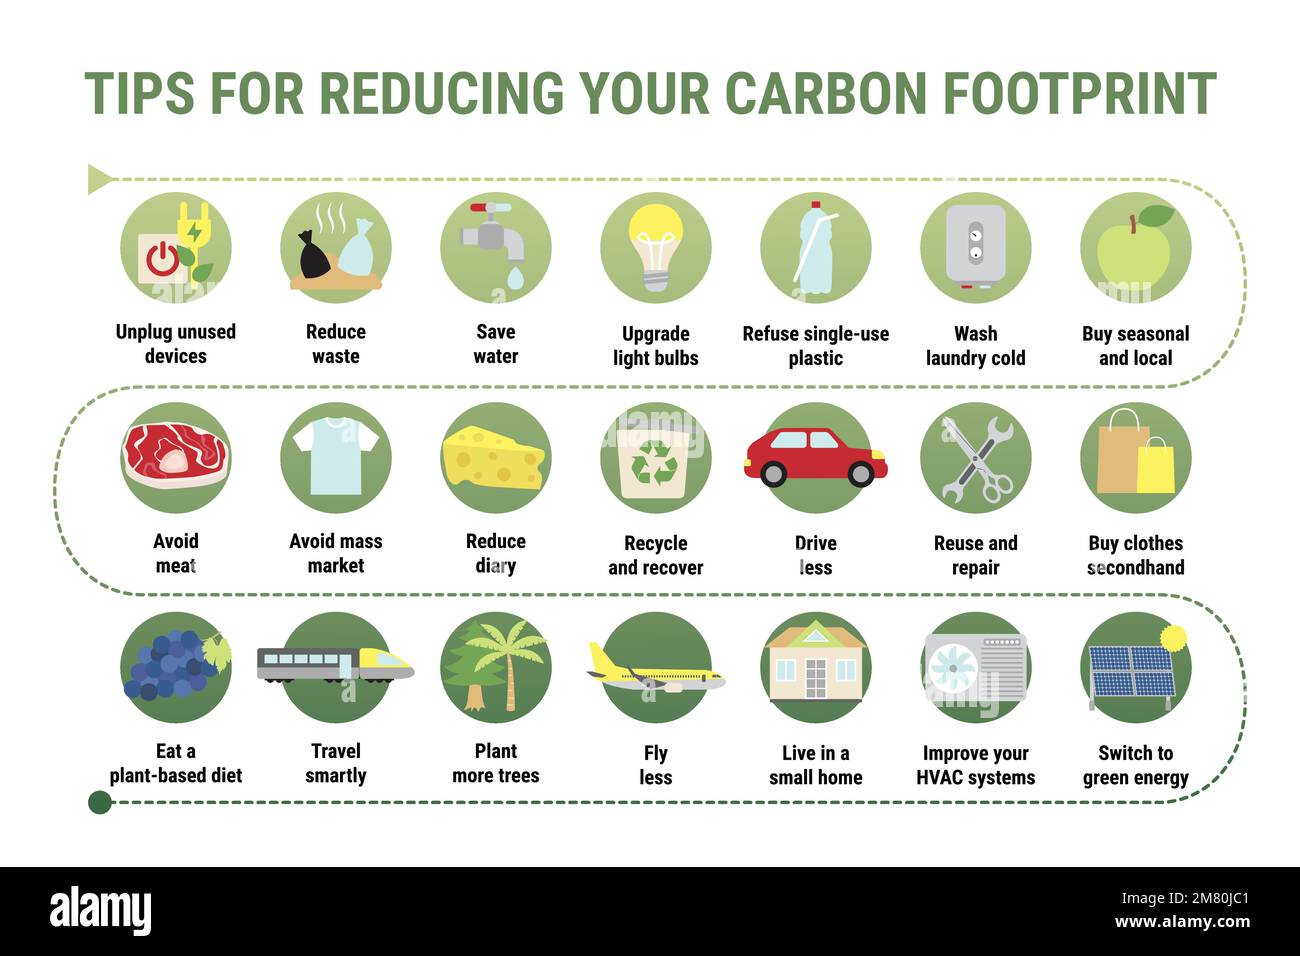 Carbon footprint infographic. Tips for reducing your personal carbon footprint. How to decrease CO2e infographic. Save the planet and environment impr Stock Vector